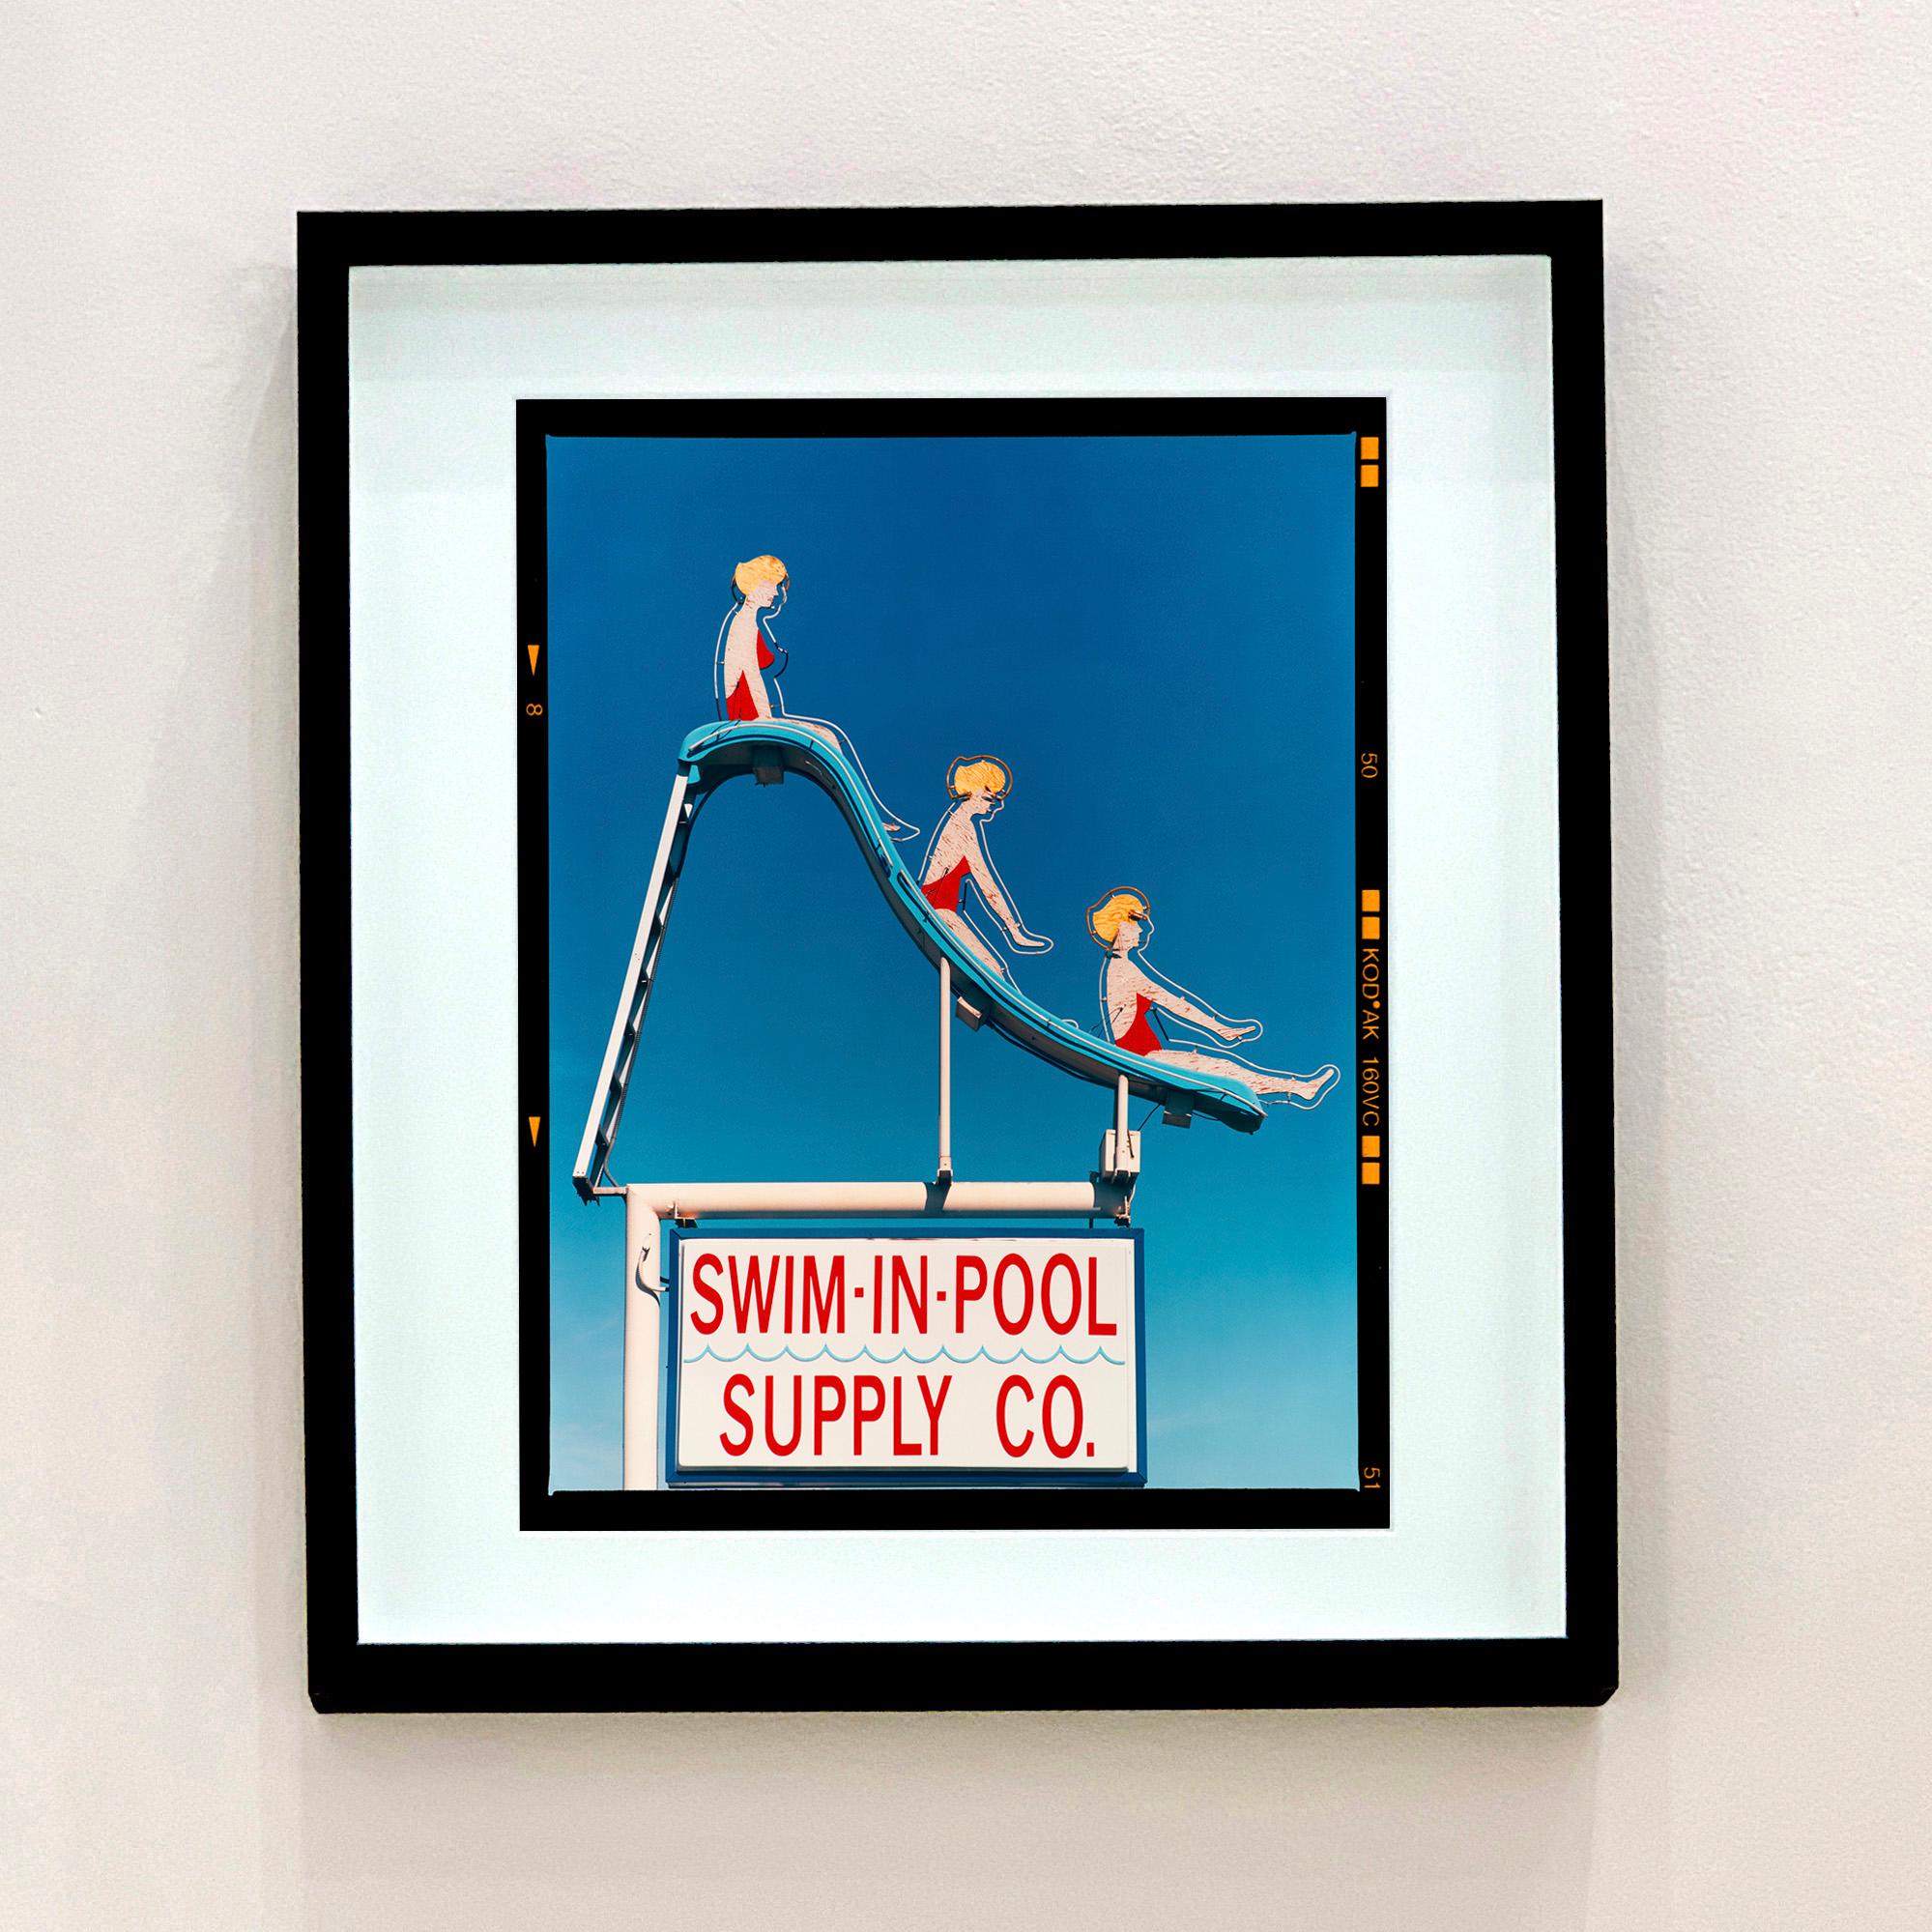 Swim-in-Pool Supply Co. Las Vegas - American Color Sign Photography  - Print by Richard Heeps